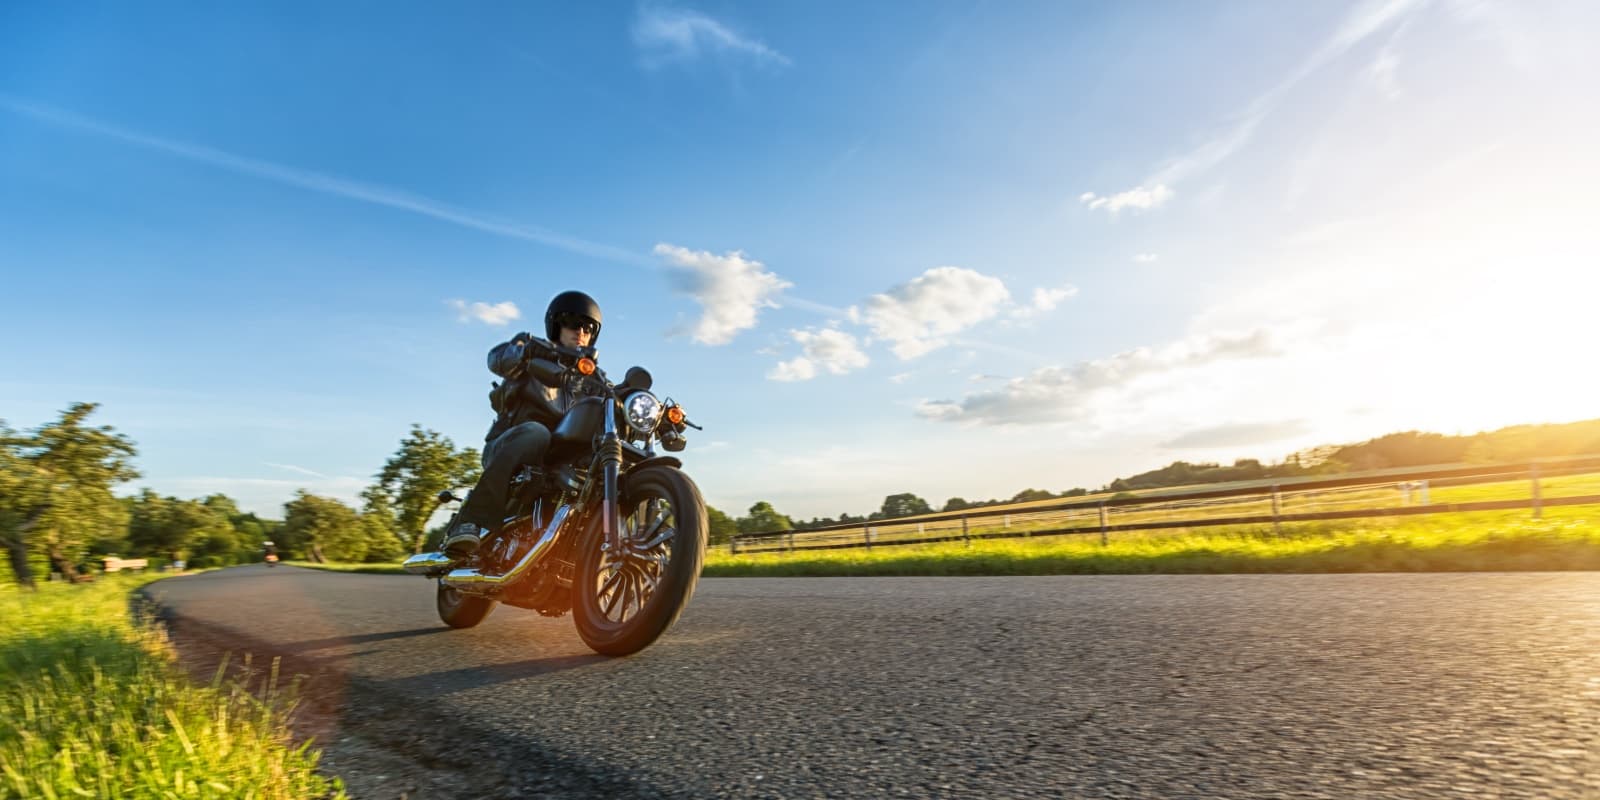 What Does Motorcycle Insurance Cover? - JMG